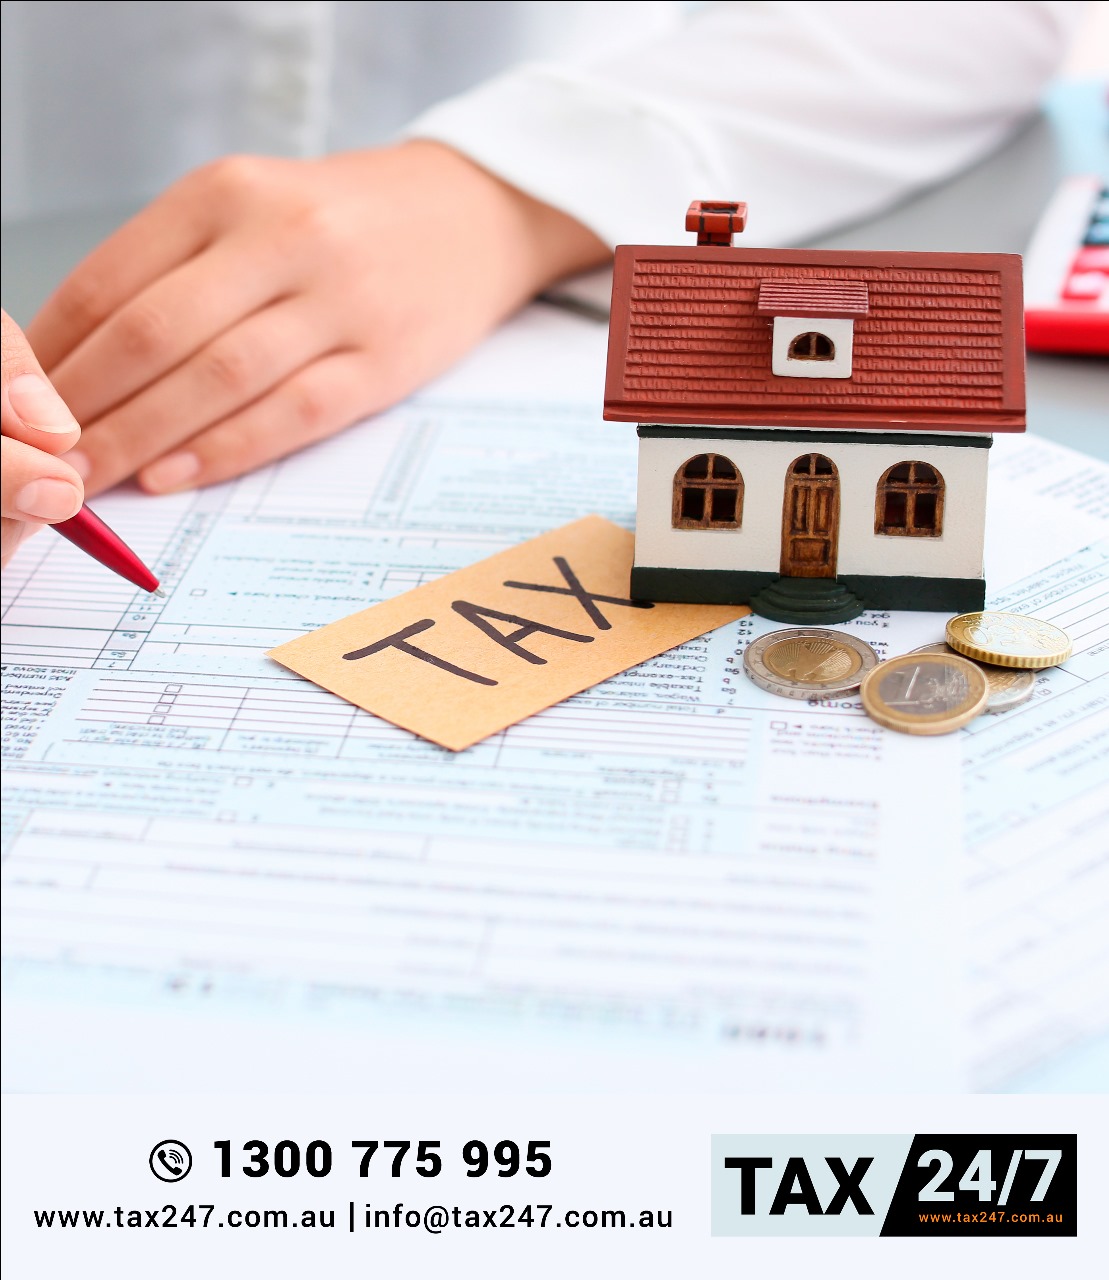 Maximize Your Tax Benefits with TAX24/7 Australia! - Brisbane Professional Services